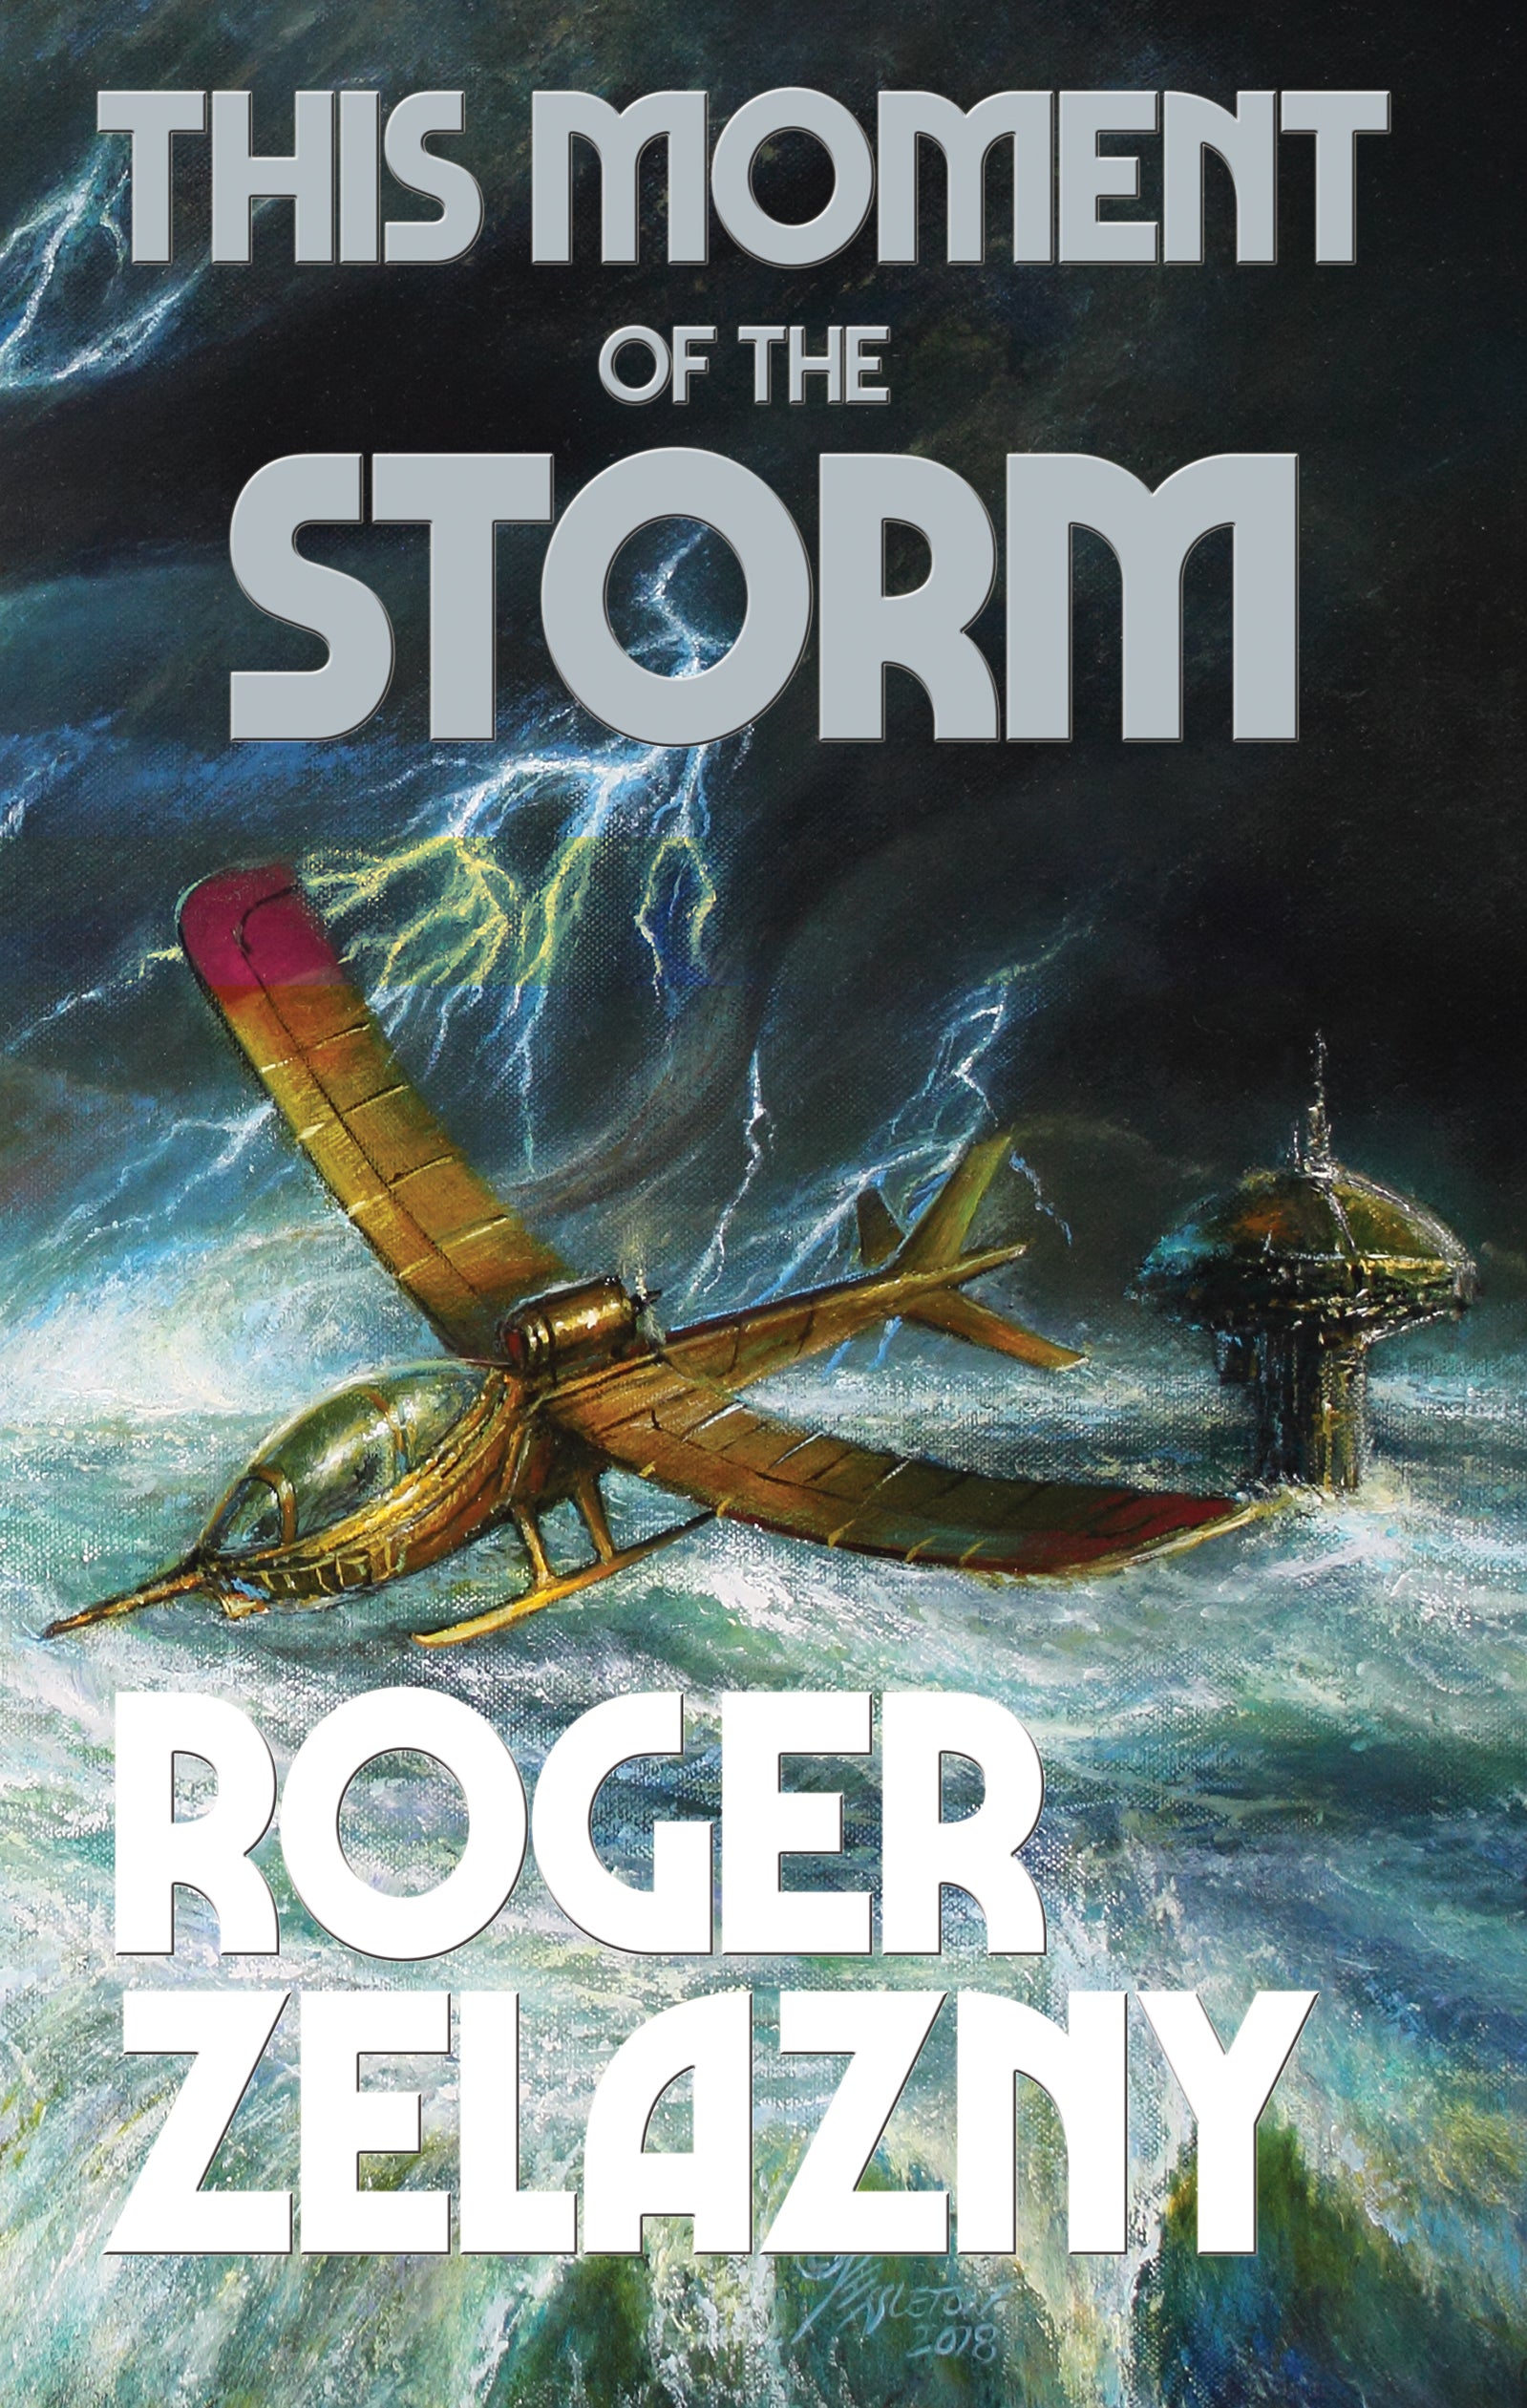 Cover for This Moment of the Storm by Roger Zelazny.